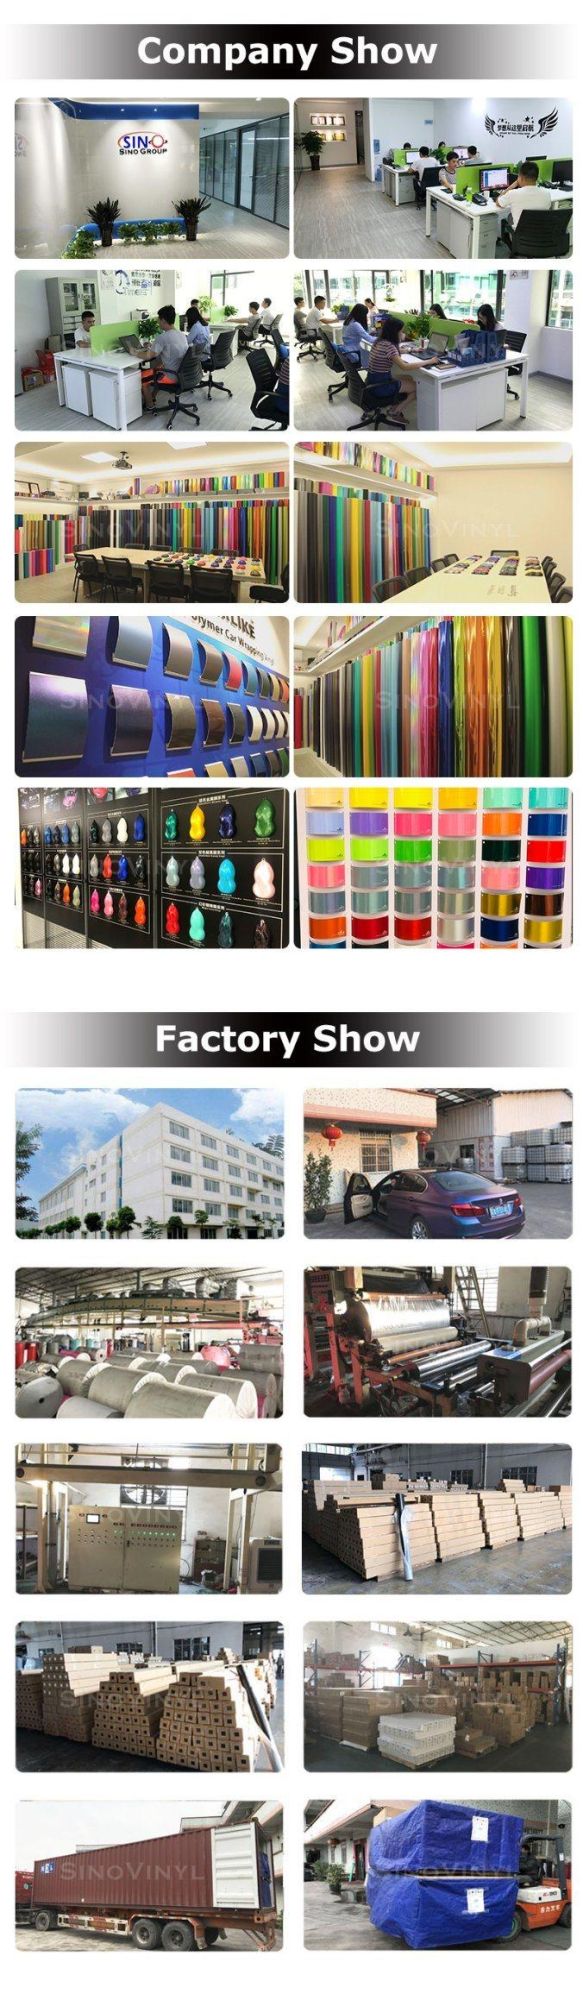 SINOVINYL 4D Carbon Fiber Hot Selling Lowest Price Black Activated Fabric Texture Car Stickers